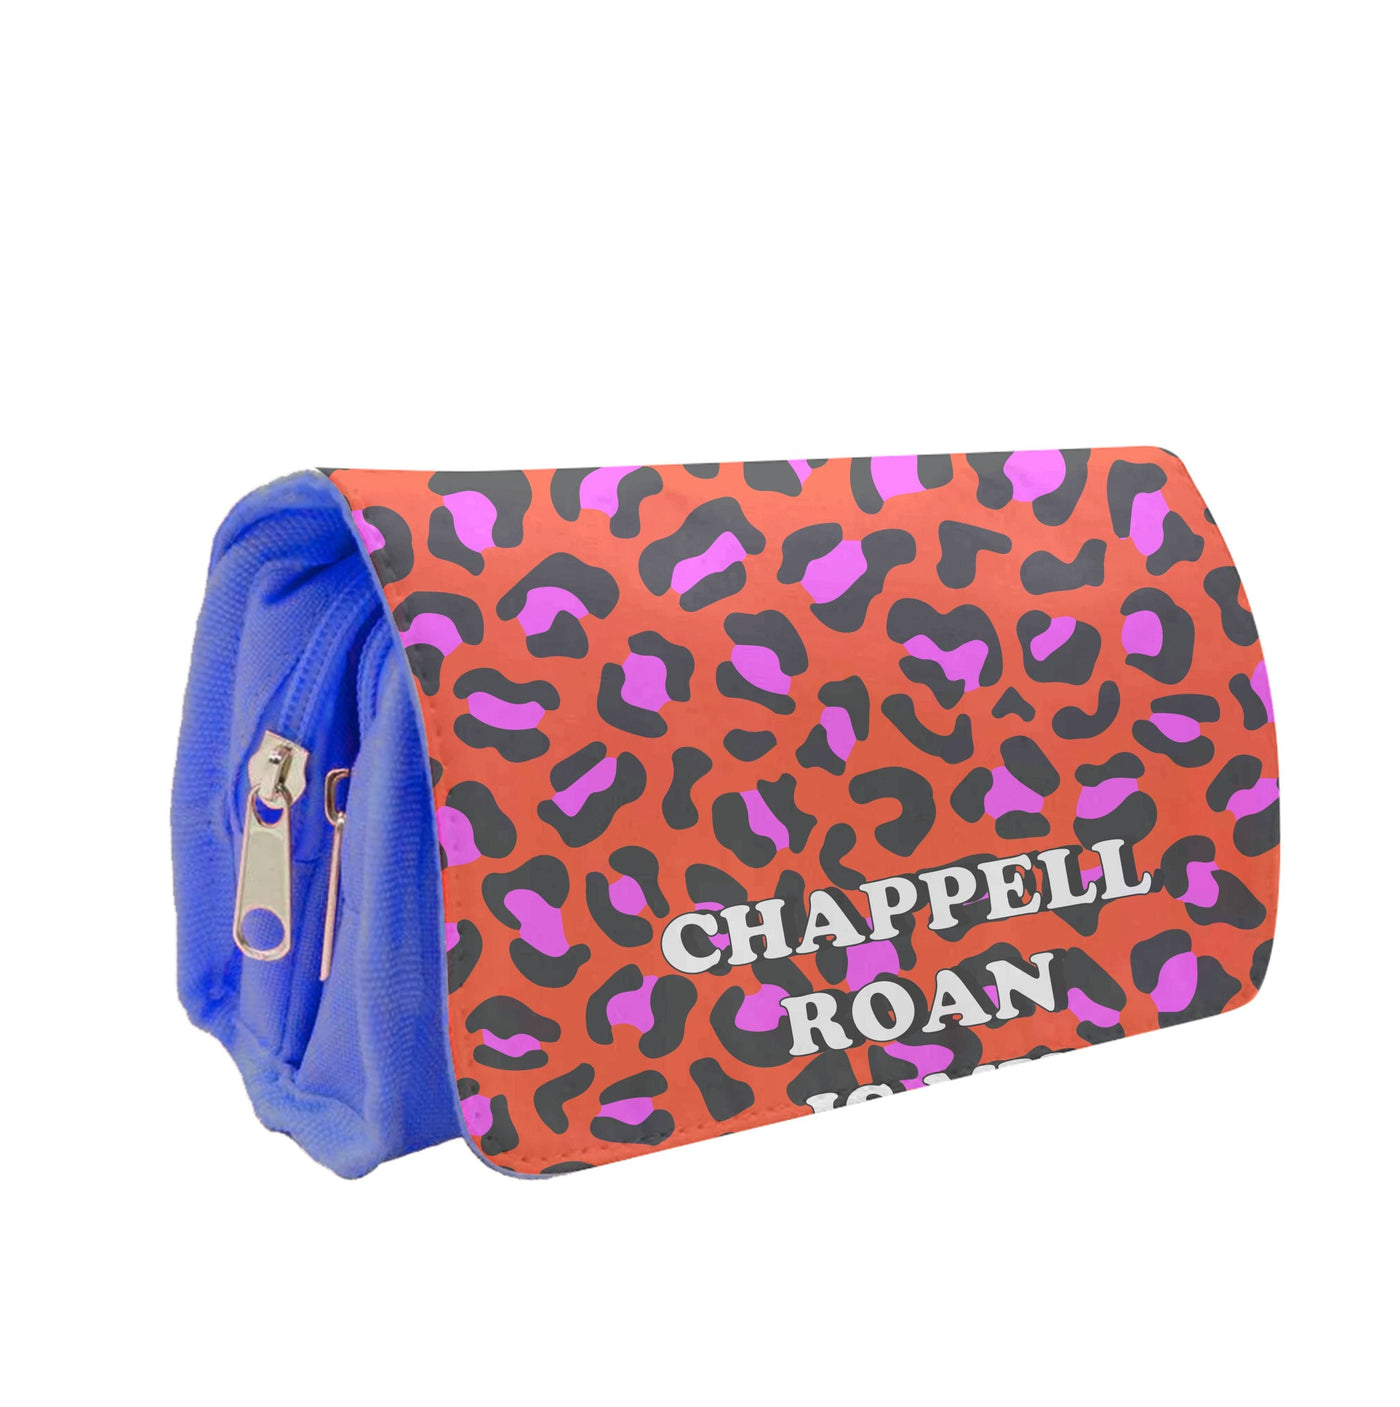 Chappell Roan Is My Spirit Animal Pencil Case